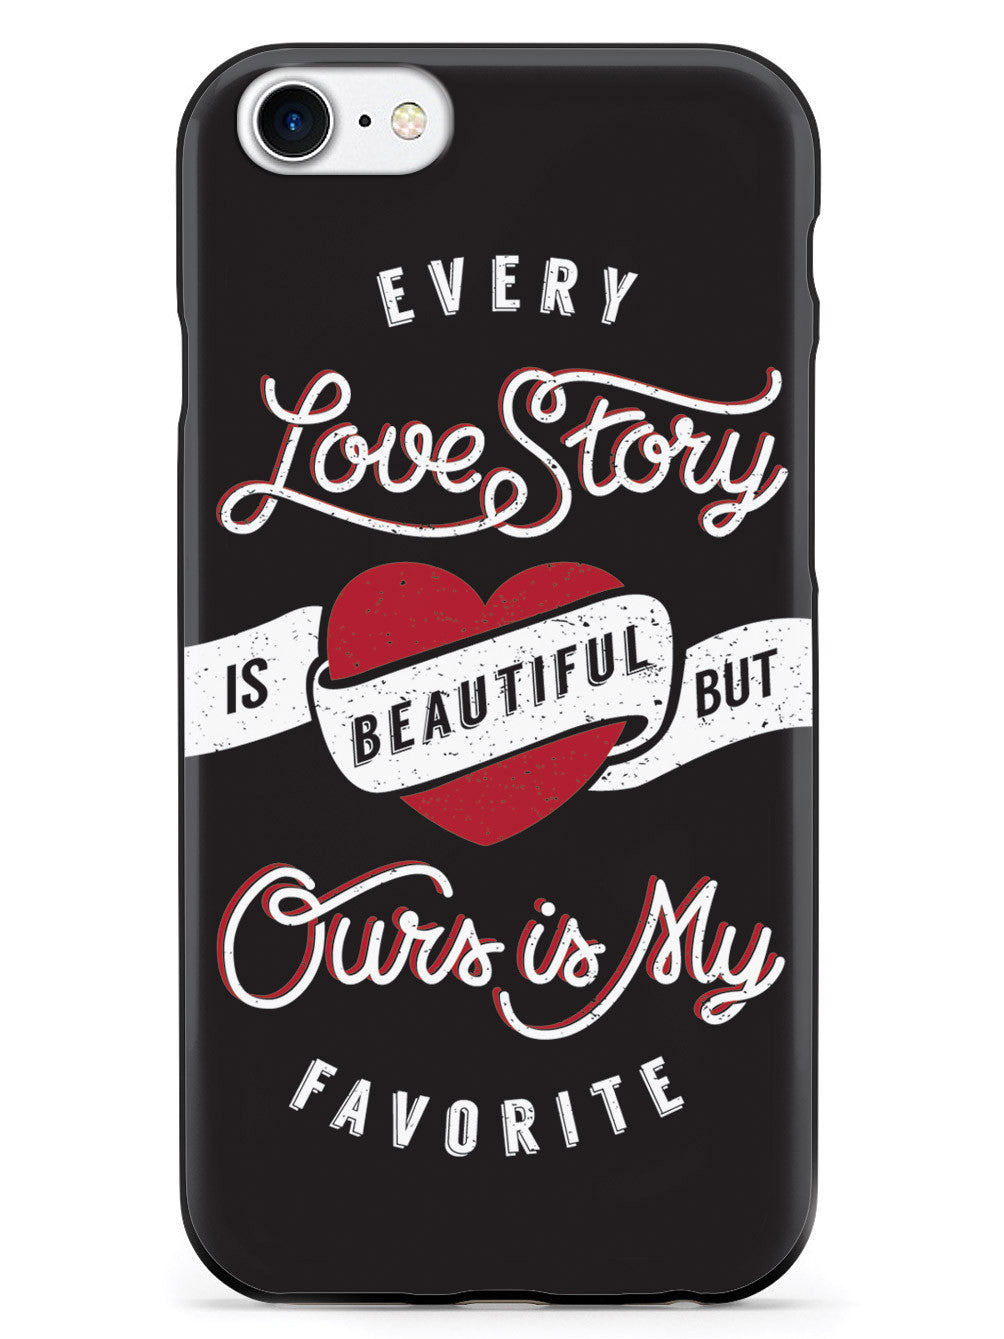 Our Love Story Case